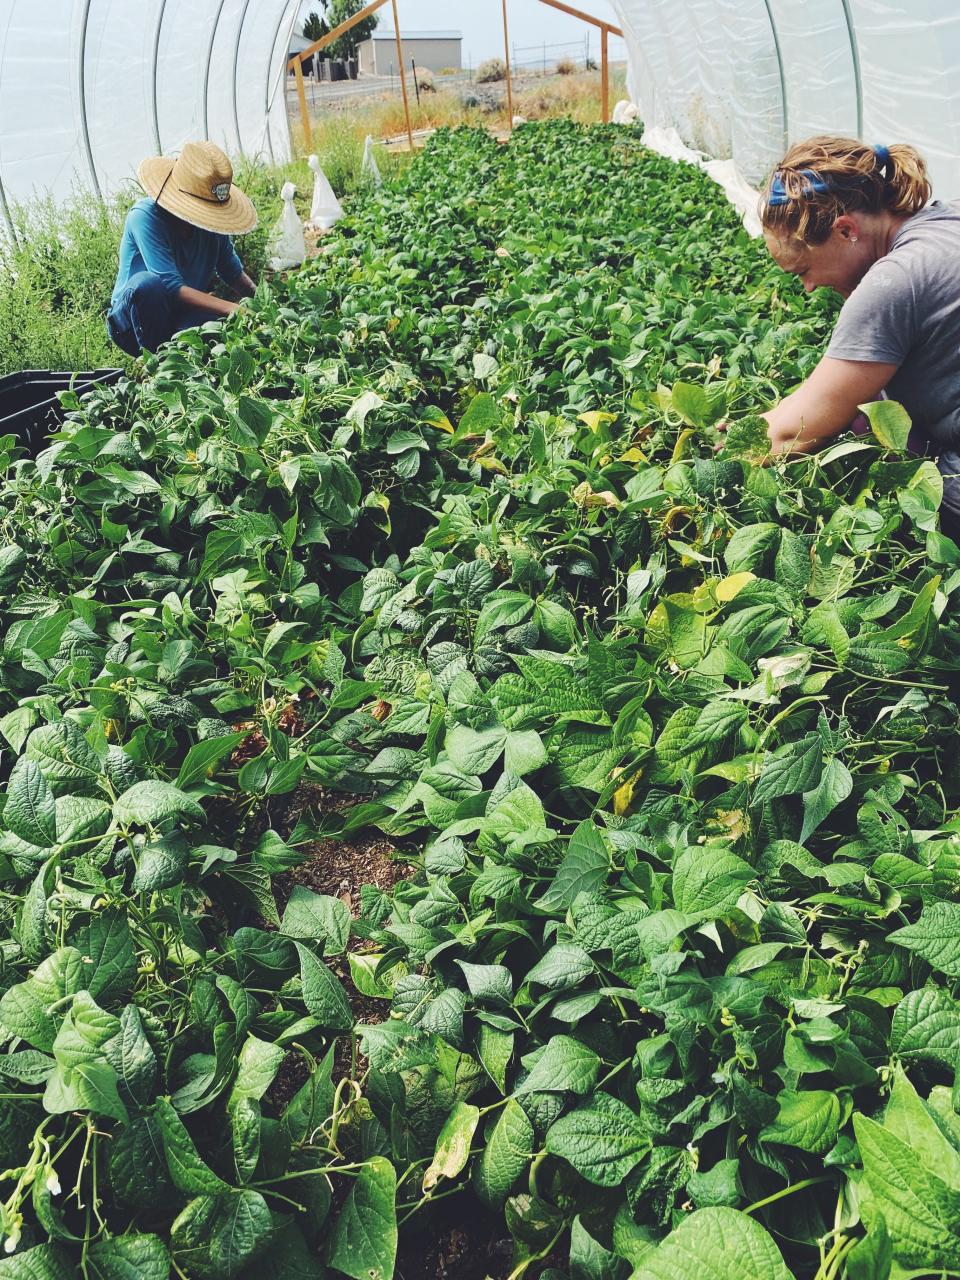 Two farm workers harvest green beans at Rosebird Farms. The small business in Kingman, owned by Andrea McAdow, grows produce on about one acre of land, and offers subscriptions to weekly food boxes to about 200 people in the area.